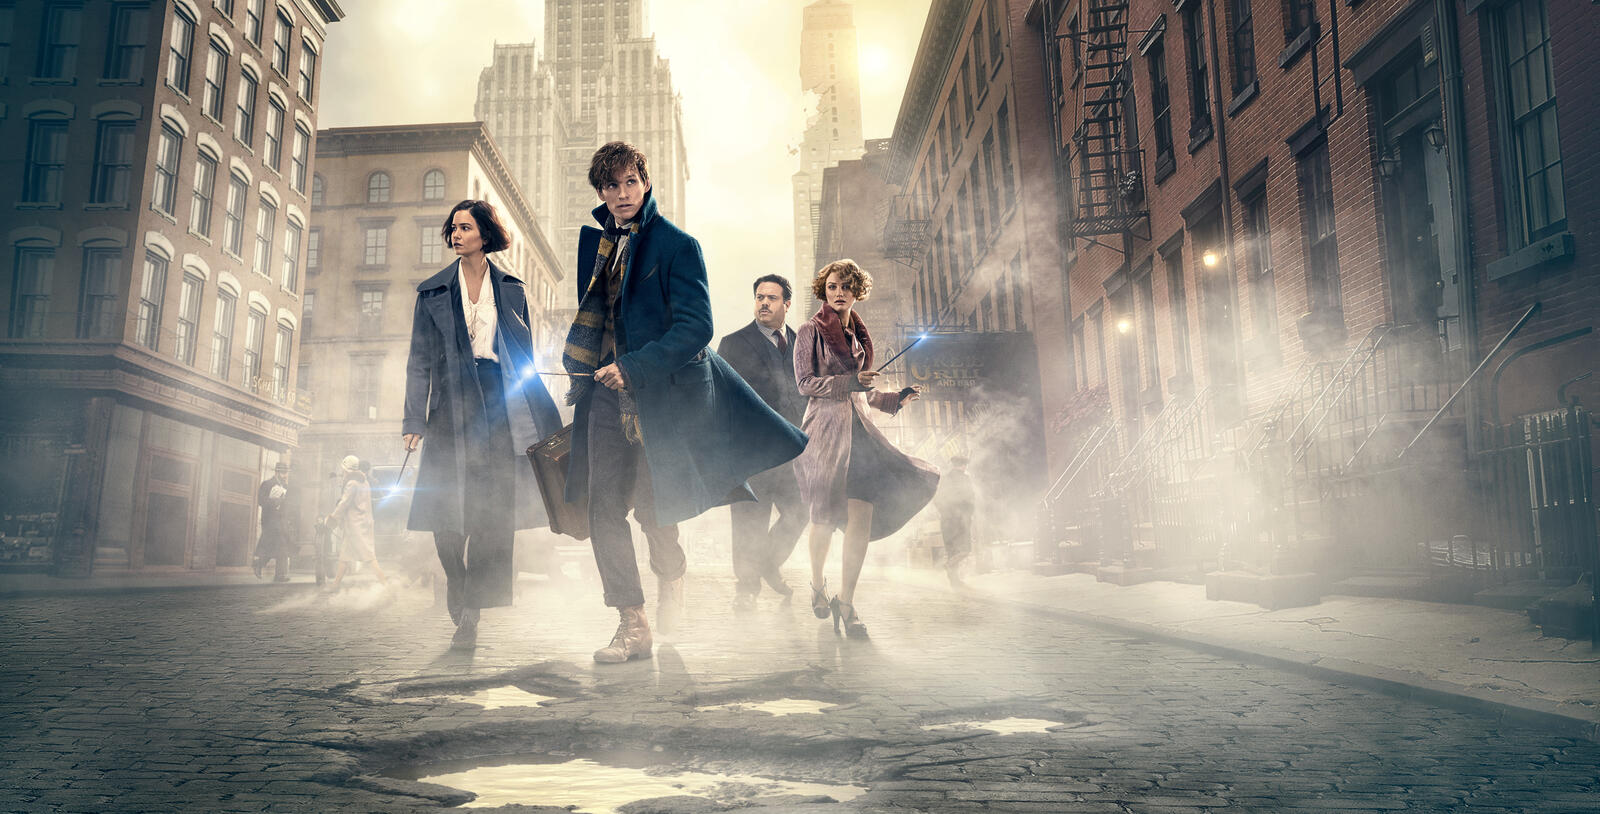 Wallpapers Fantastic beasts and where they live film fantasy on the desktop